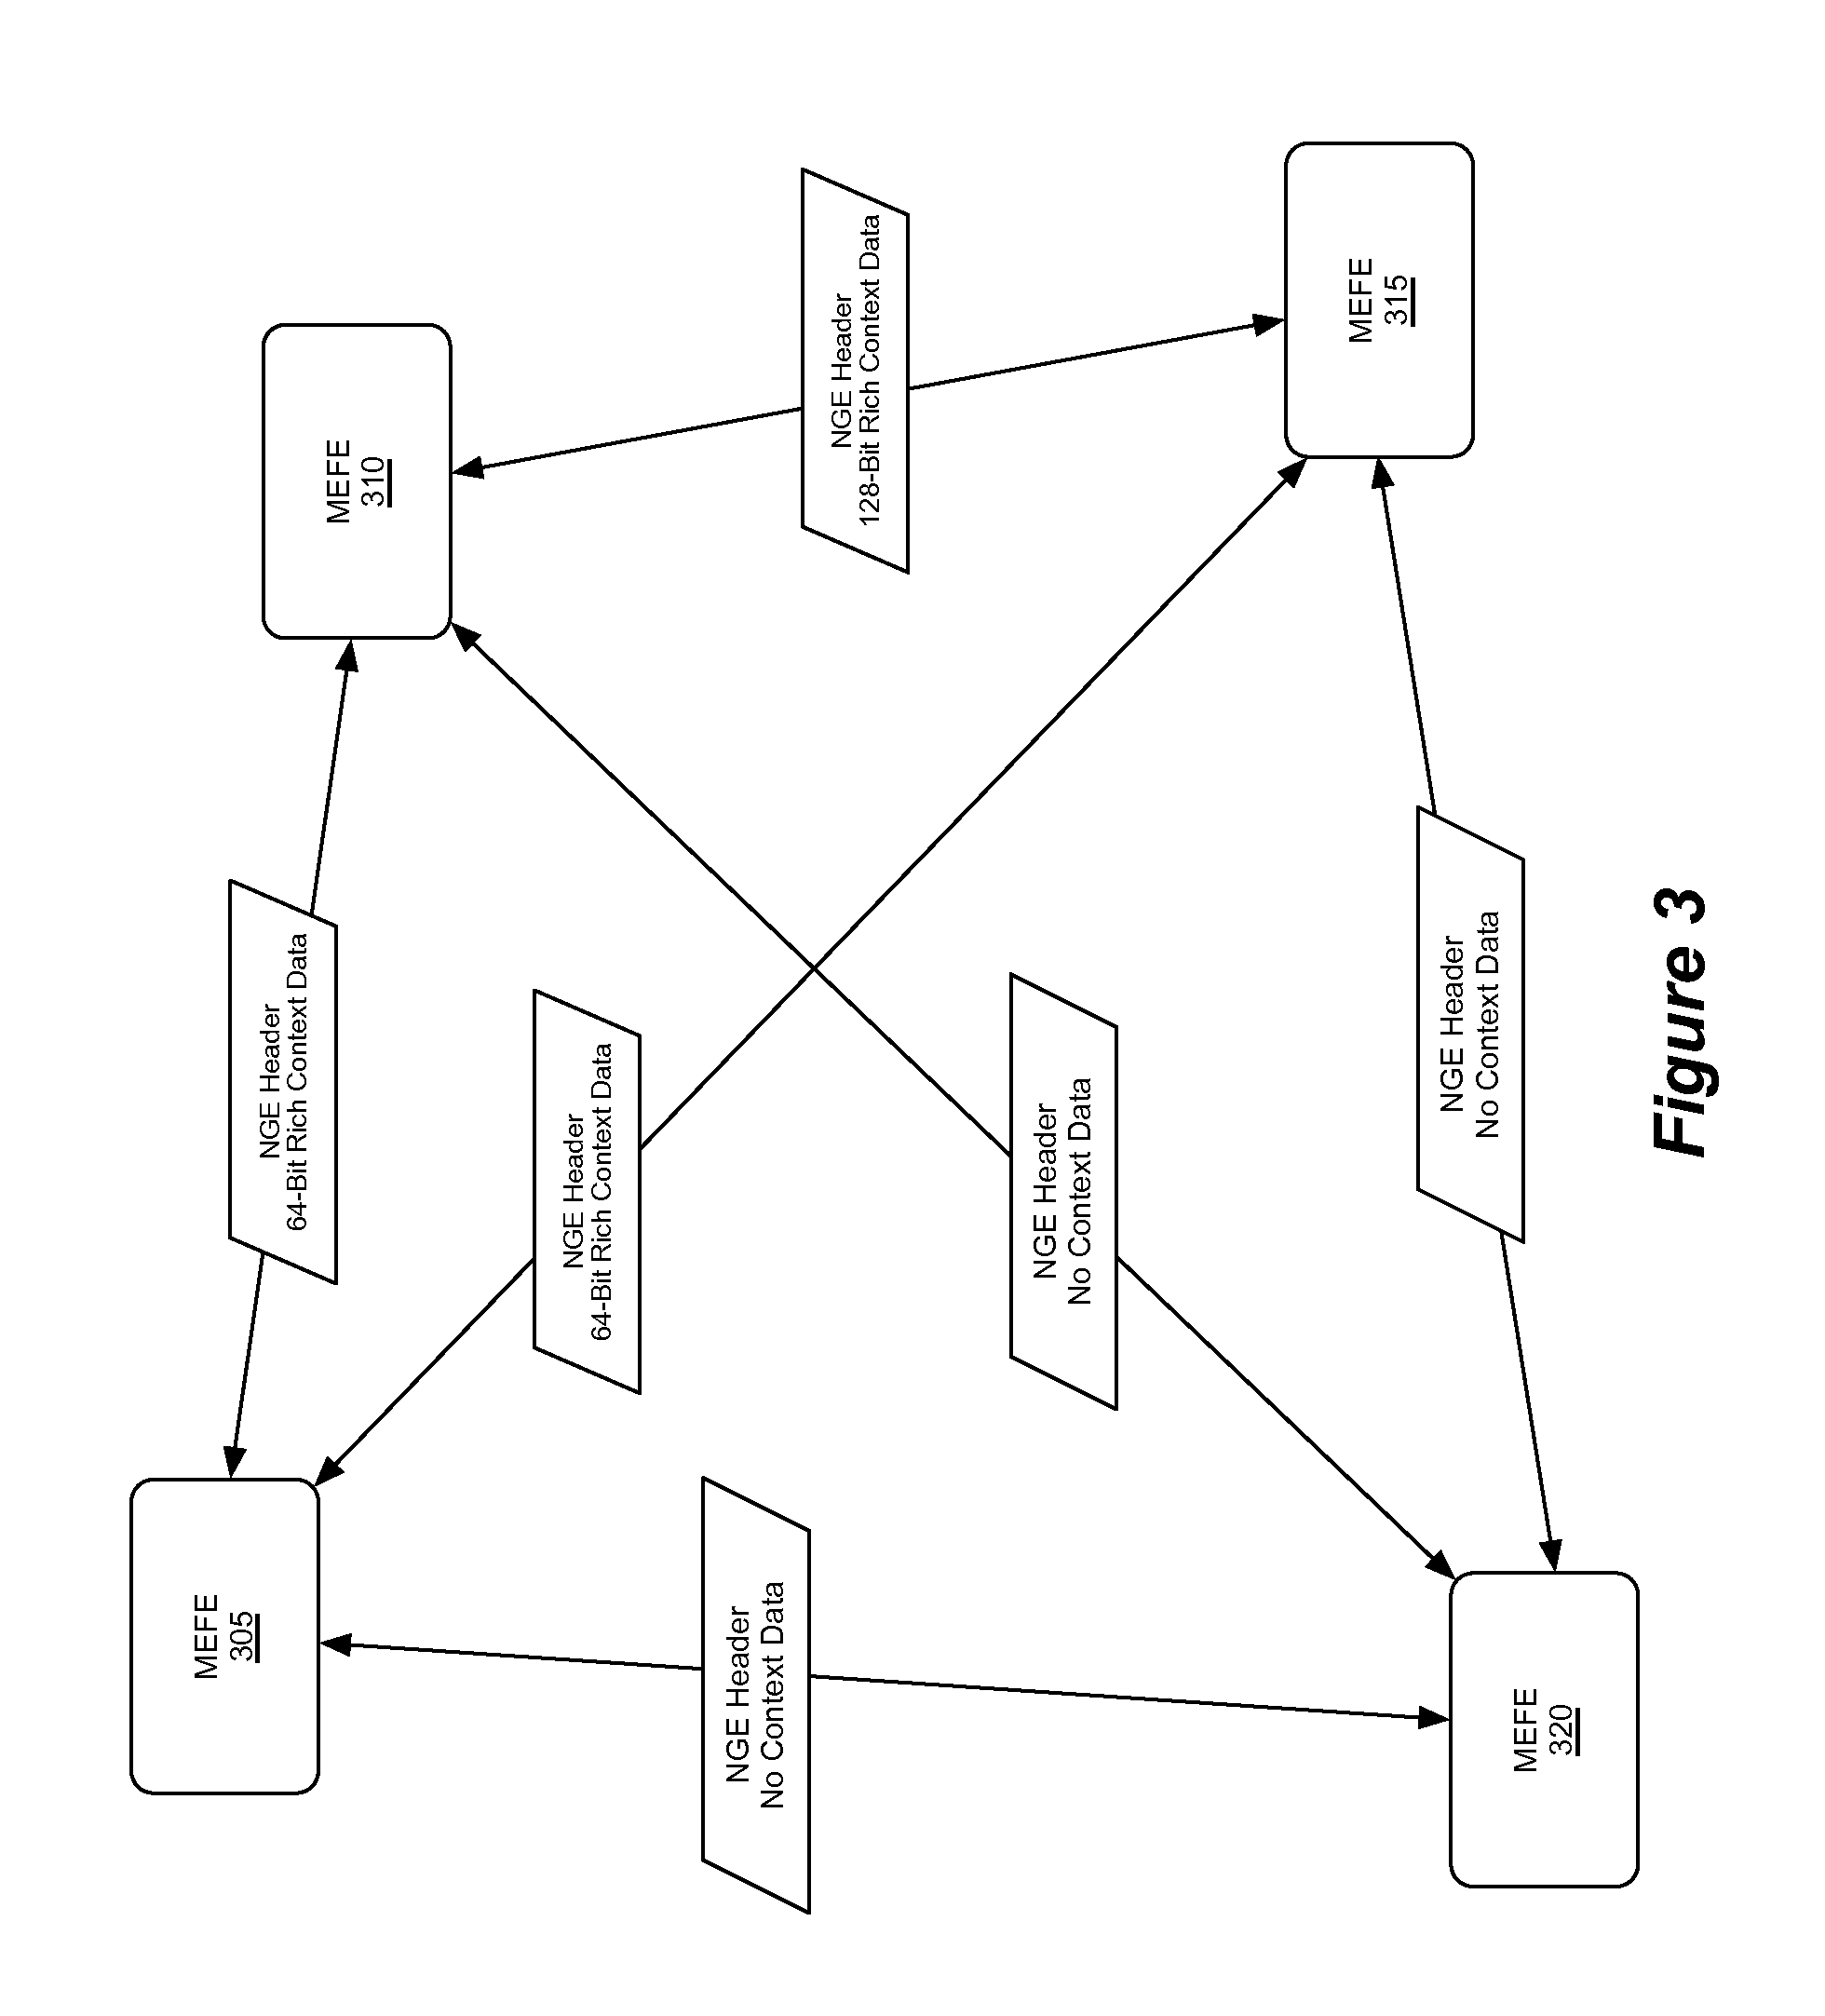 Encapsulating Data Packets Using an Adaptive Tunnelling Protocol